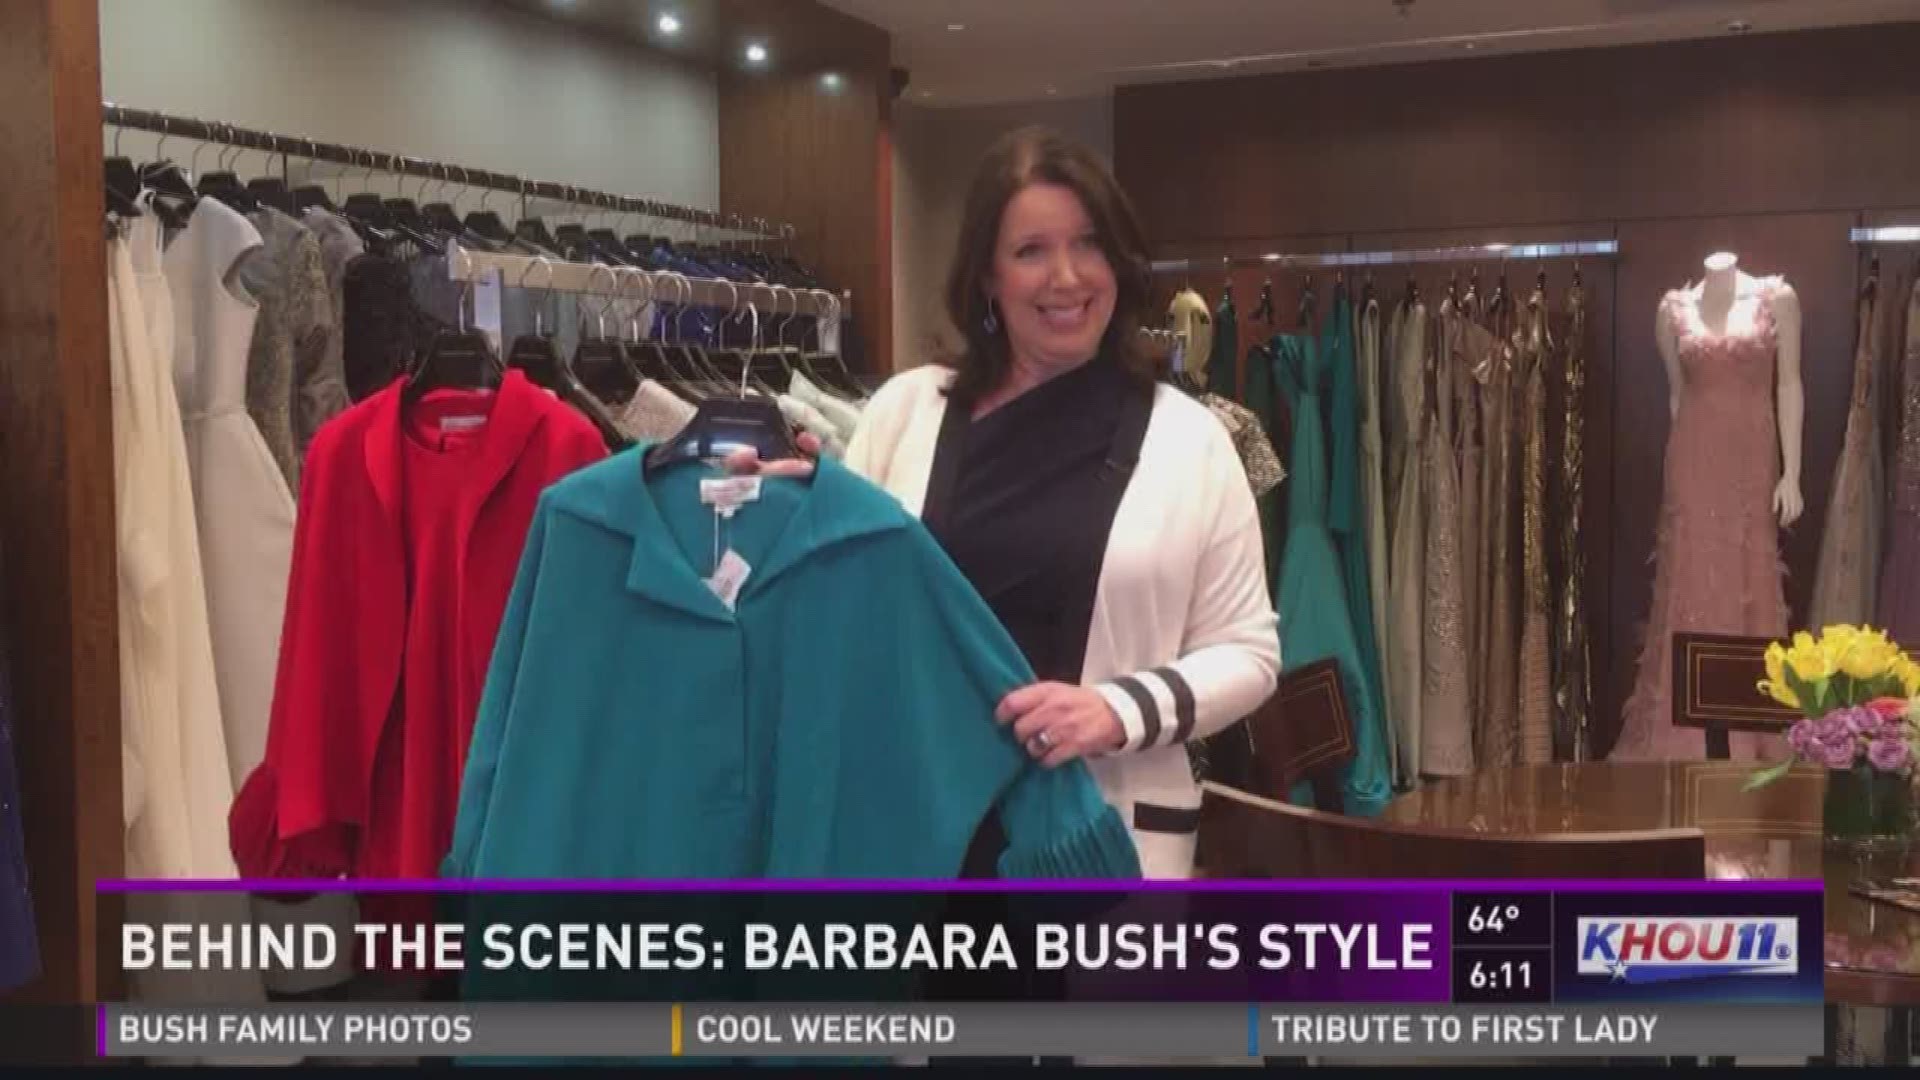 KHOU 11 reporter Shern Min Chow spoke with one of Barbara Bush's designers at a store in Houston. 